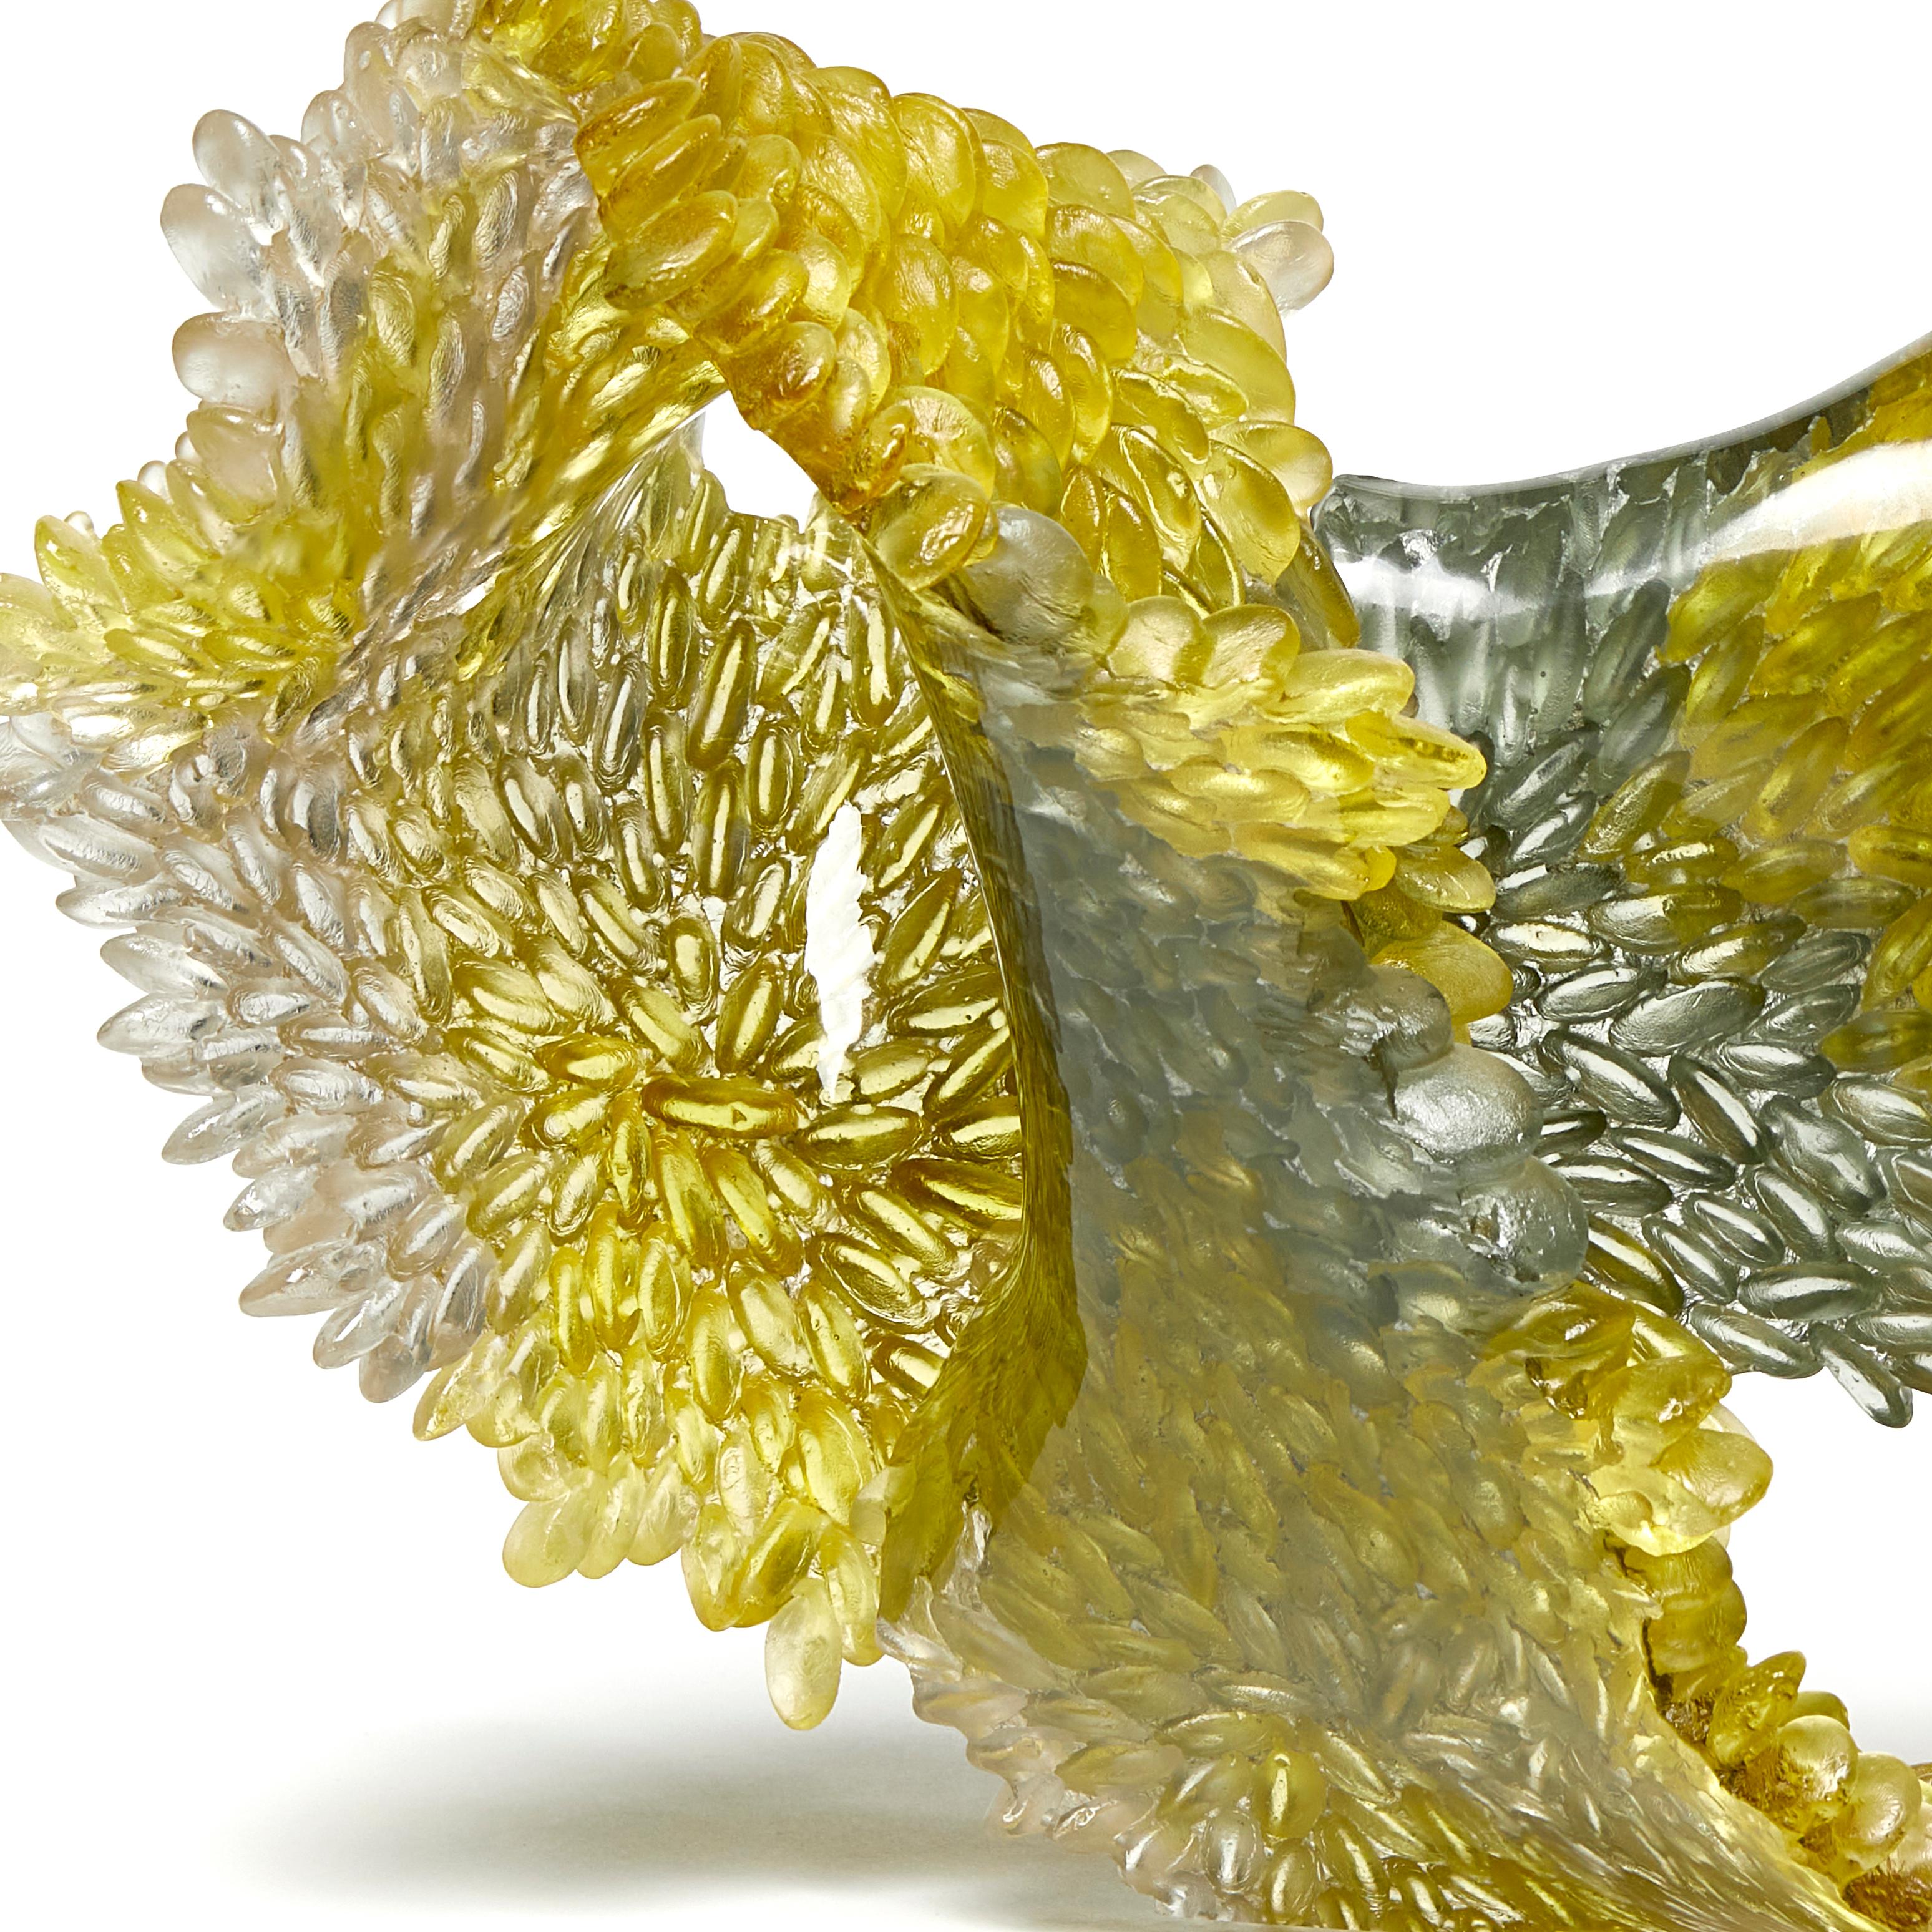 Cast The Way it Twists, Unique Glass Sculpture in Grey & Gold by Nina Casson McGarva